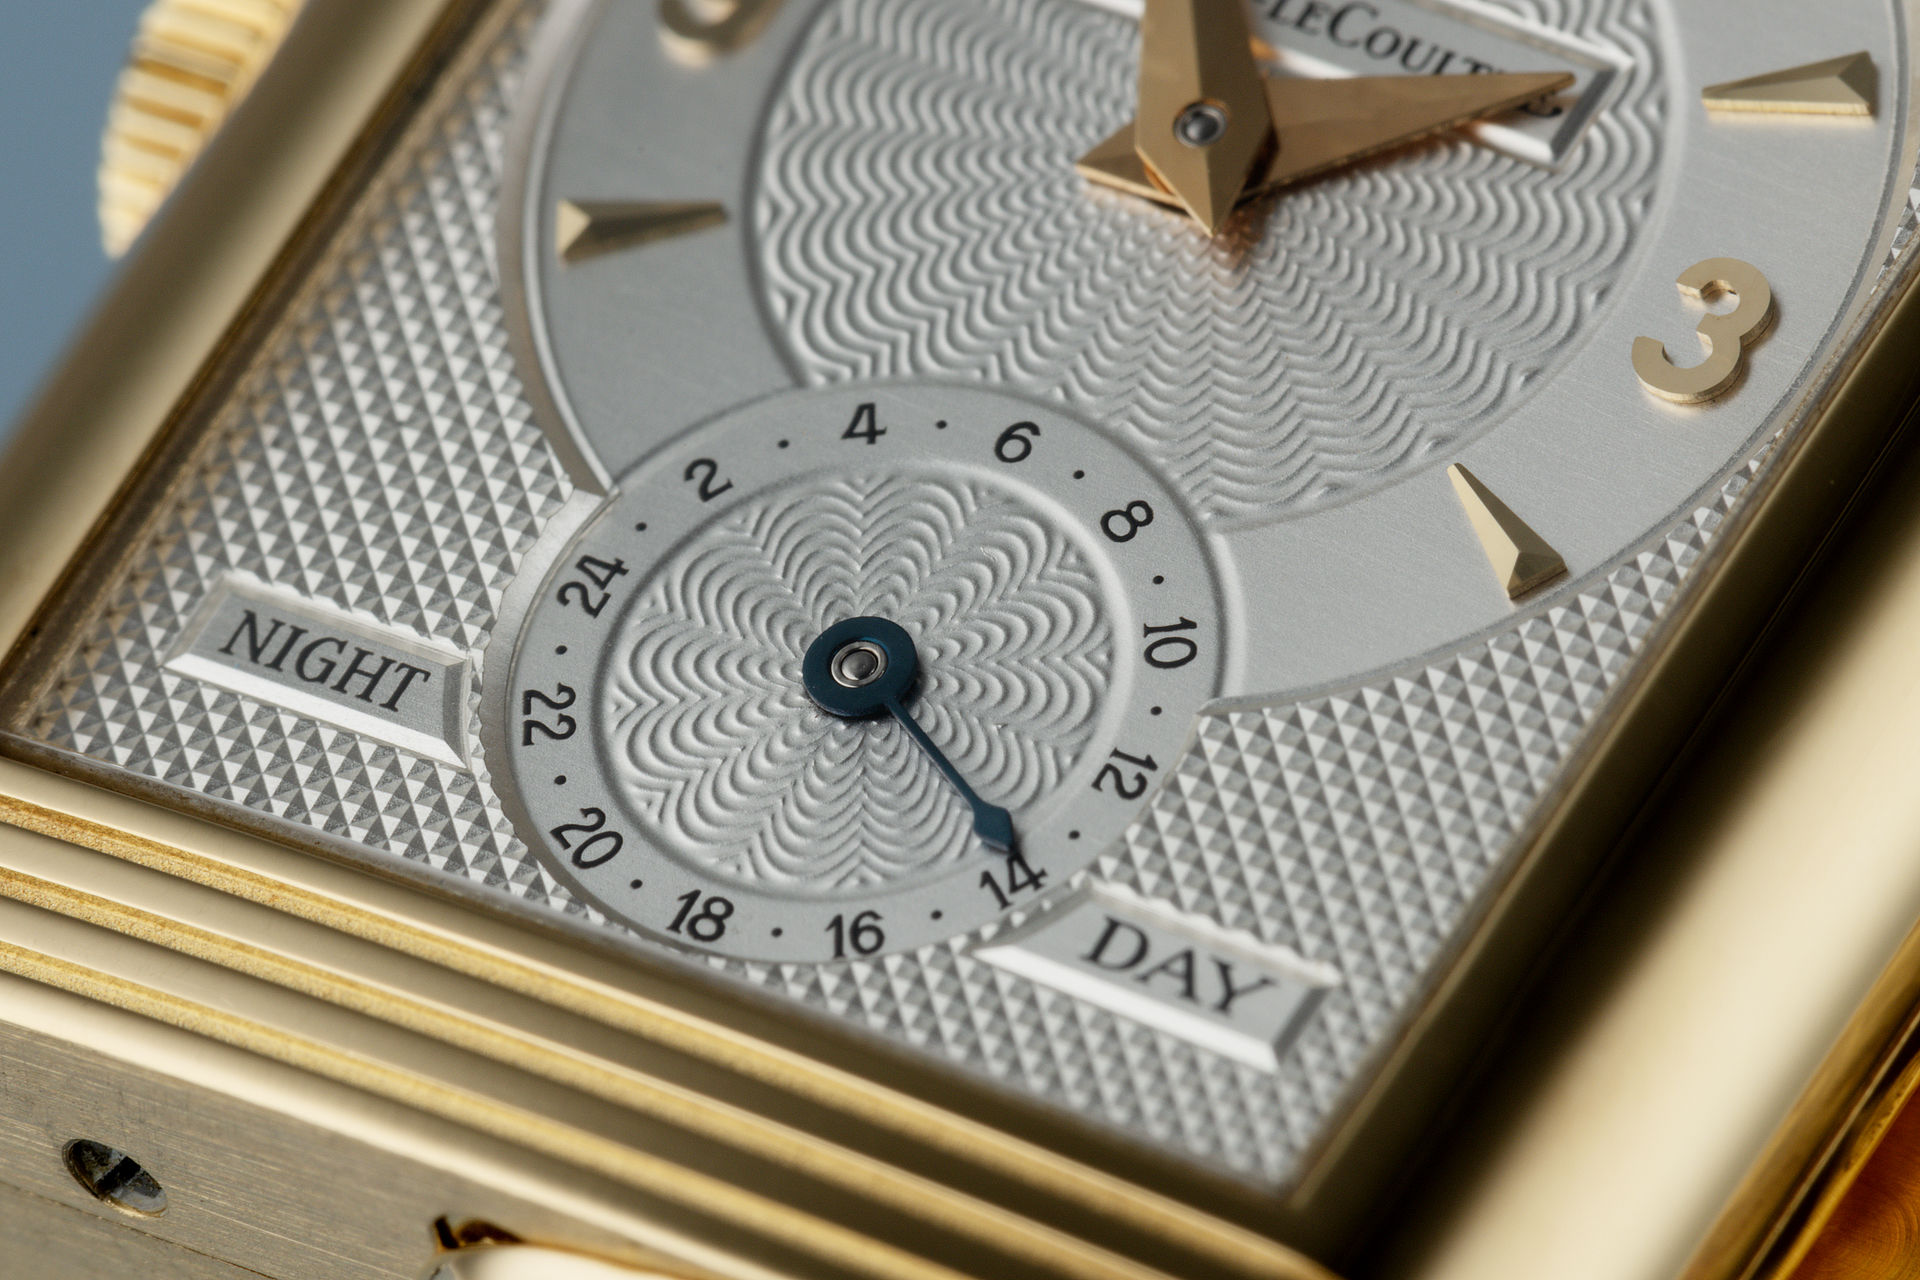 Yellow Gold "Night & Day" | ref 270.1.54 | Jaeger-leCoultre Reverso Duo